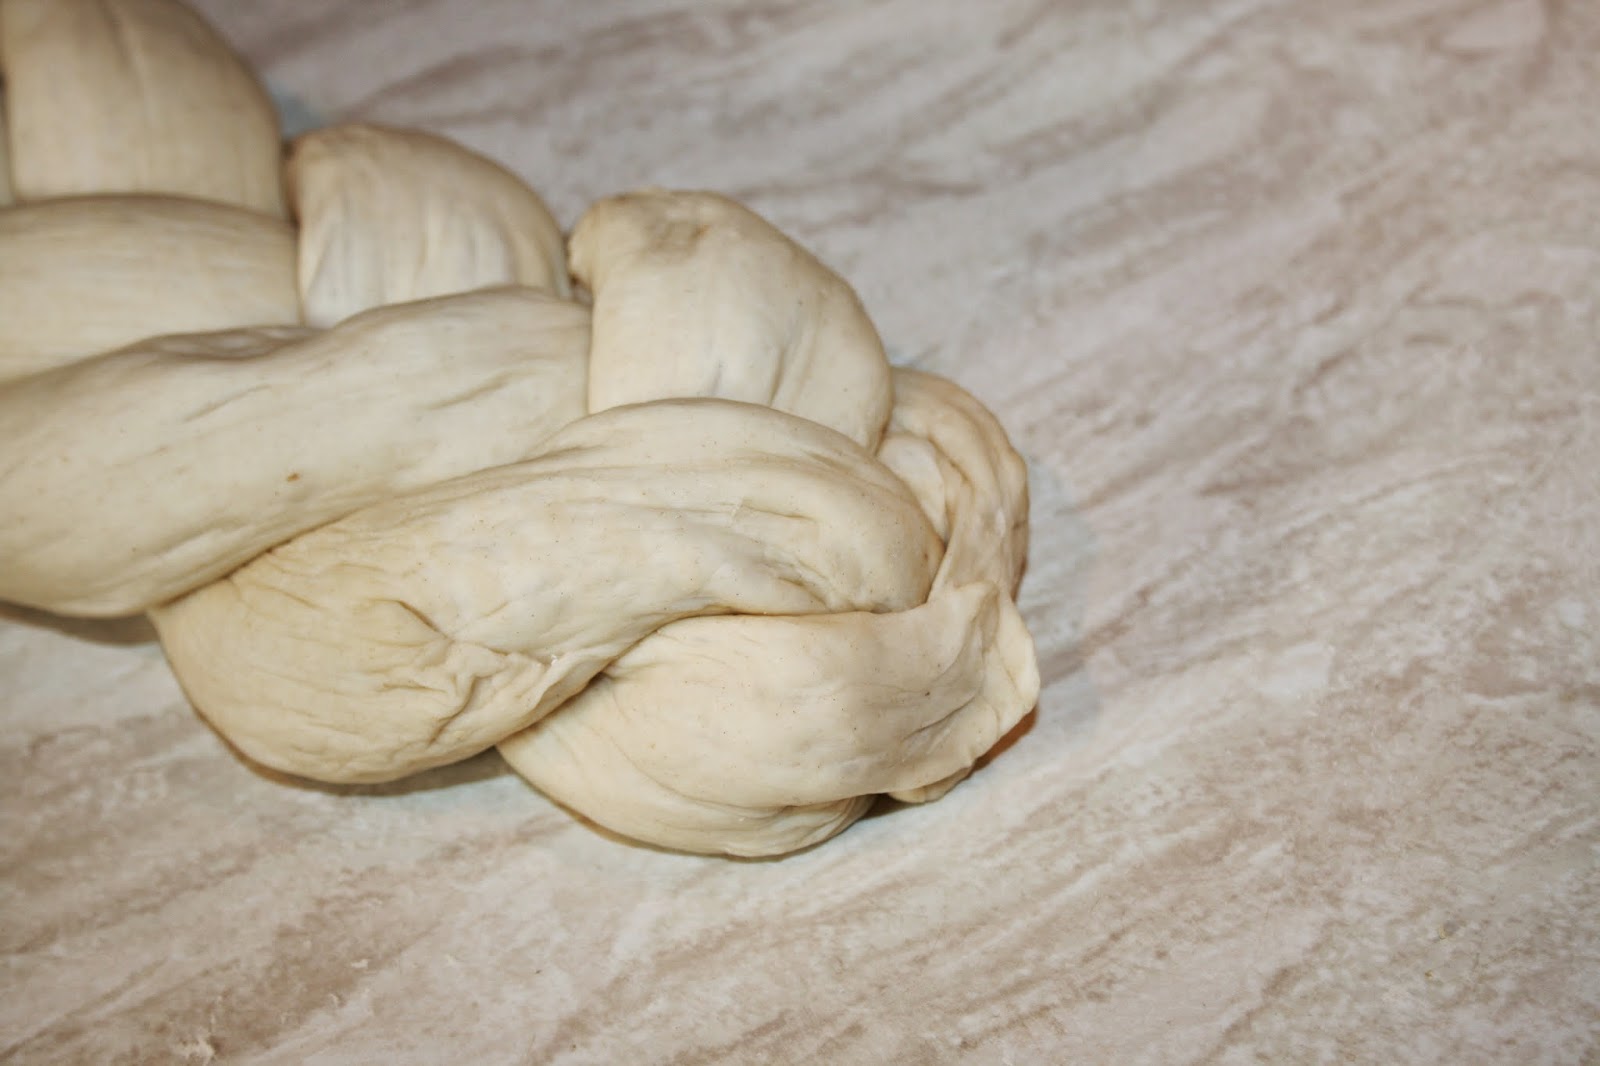 how to braid bread four stranded plait